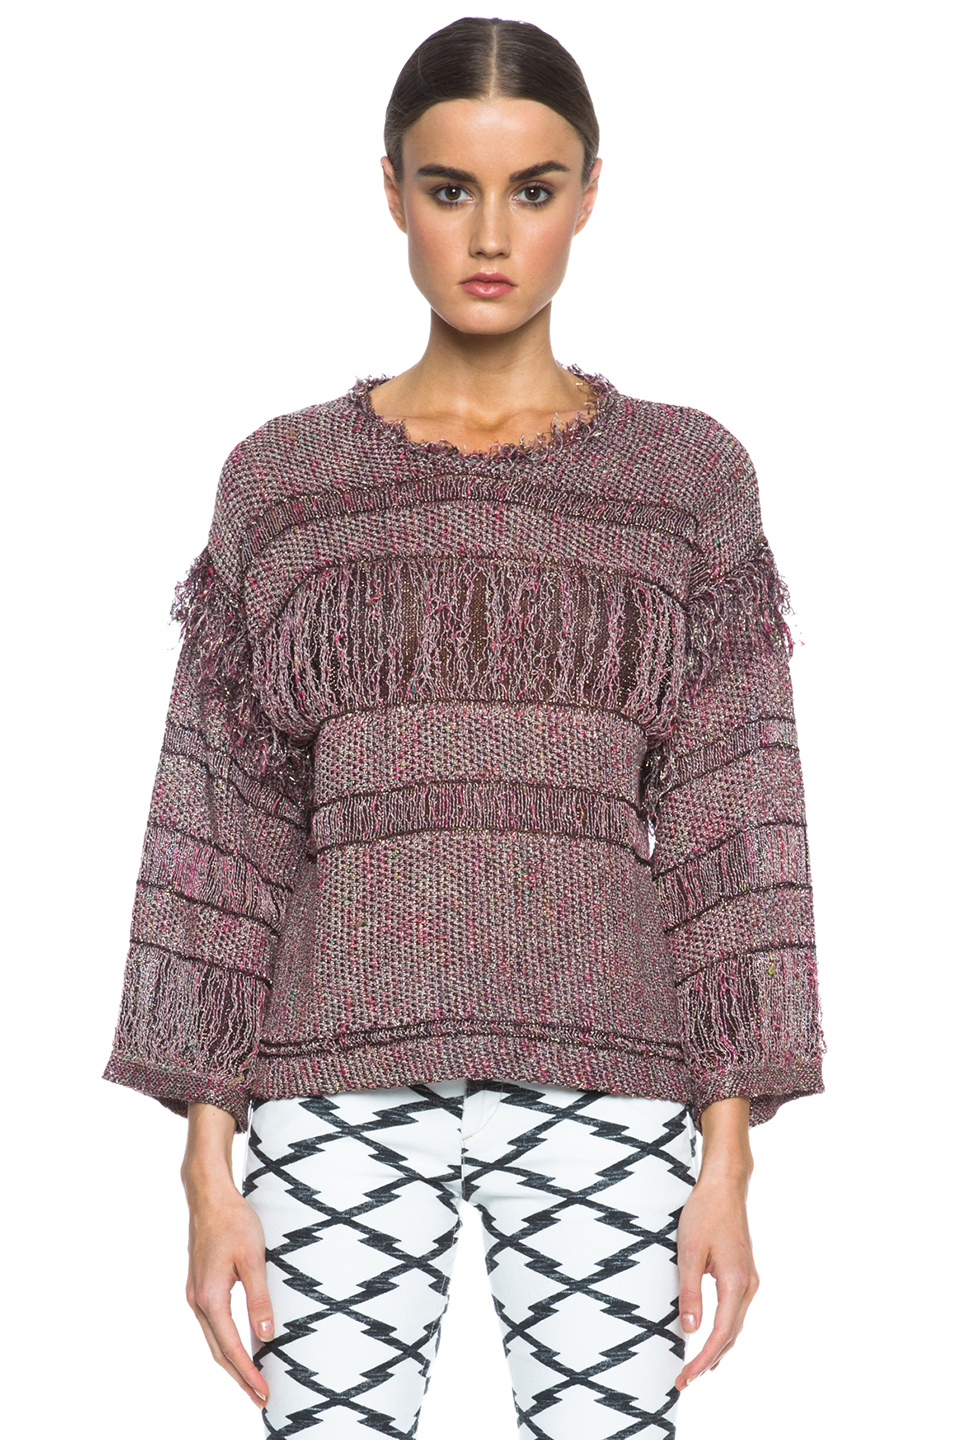 Lyst - Isabel marant Glimy Sweater in Pink